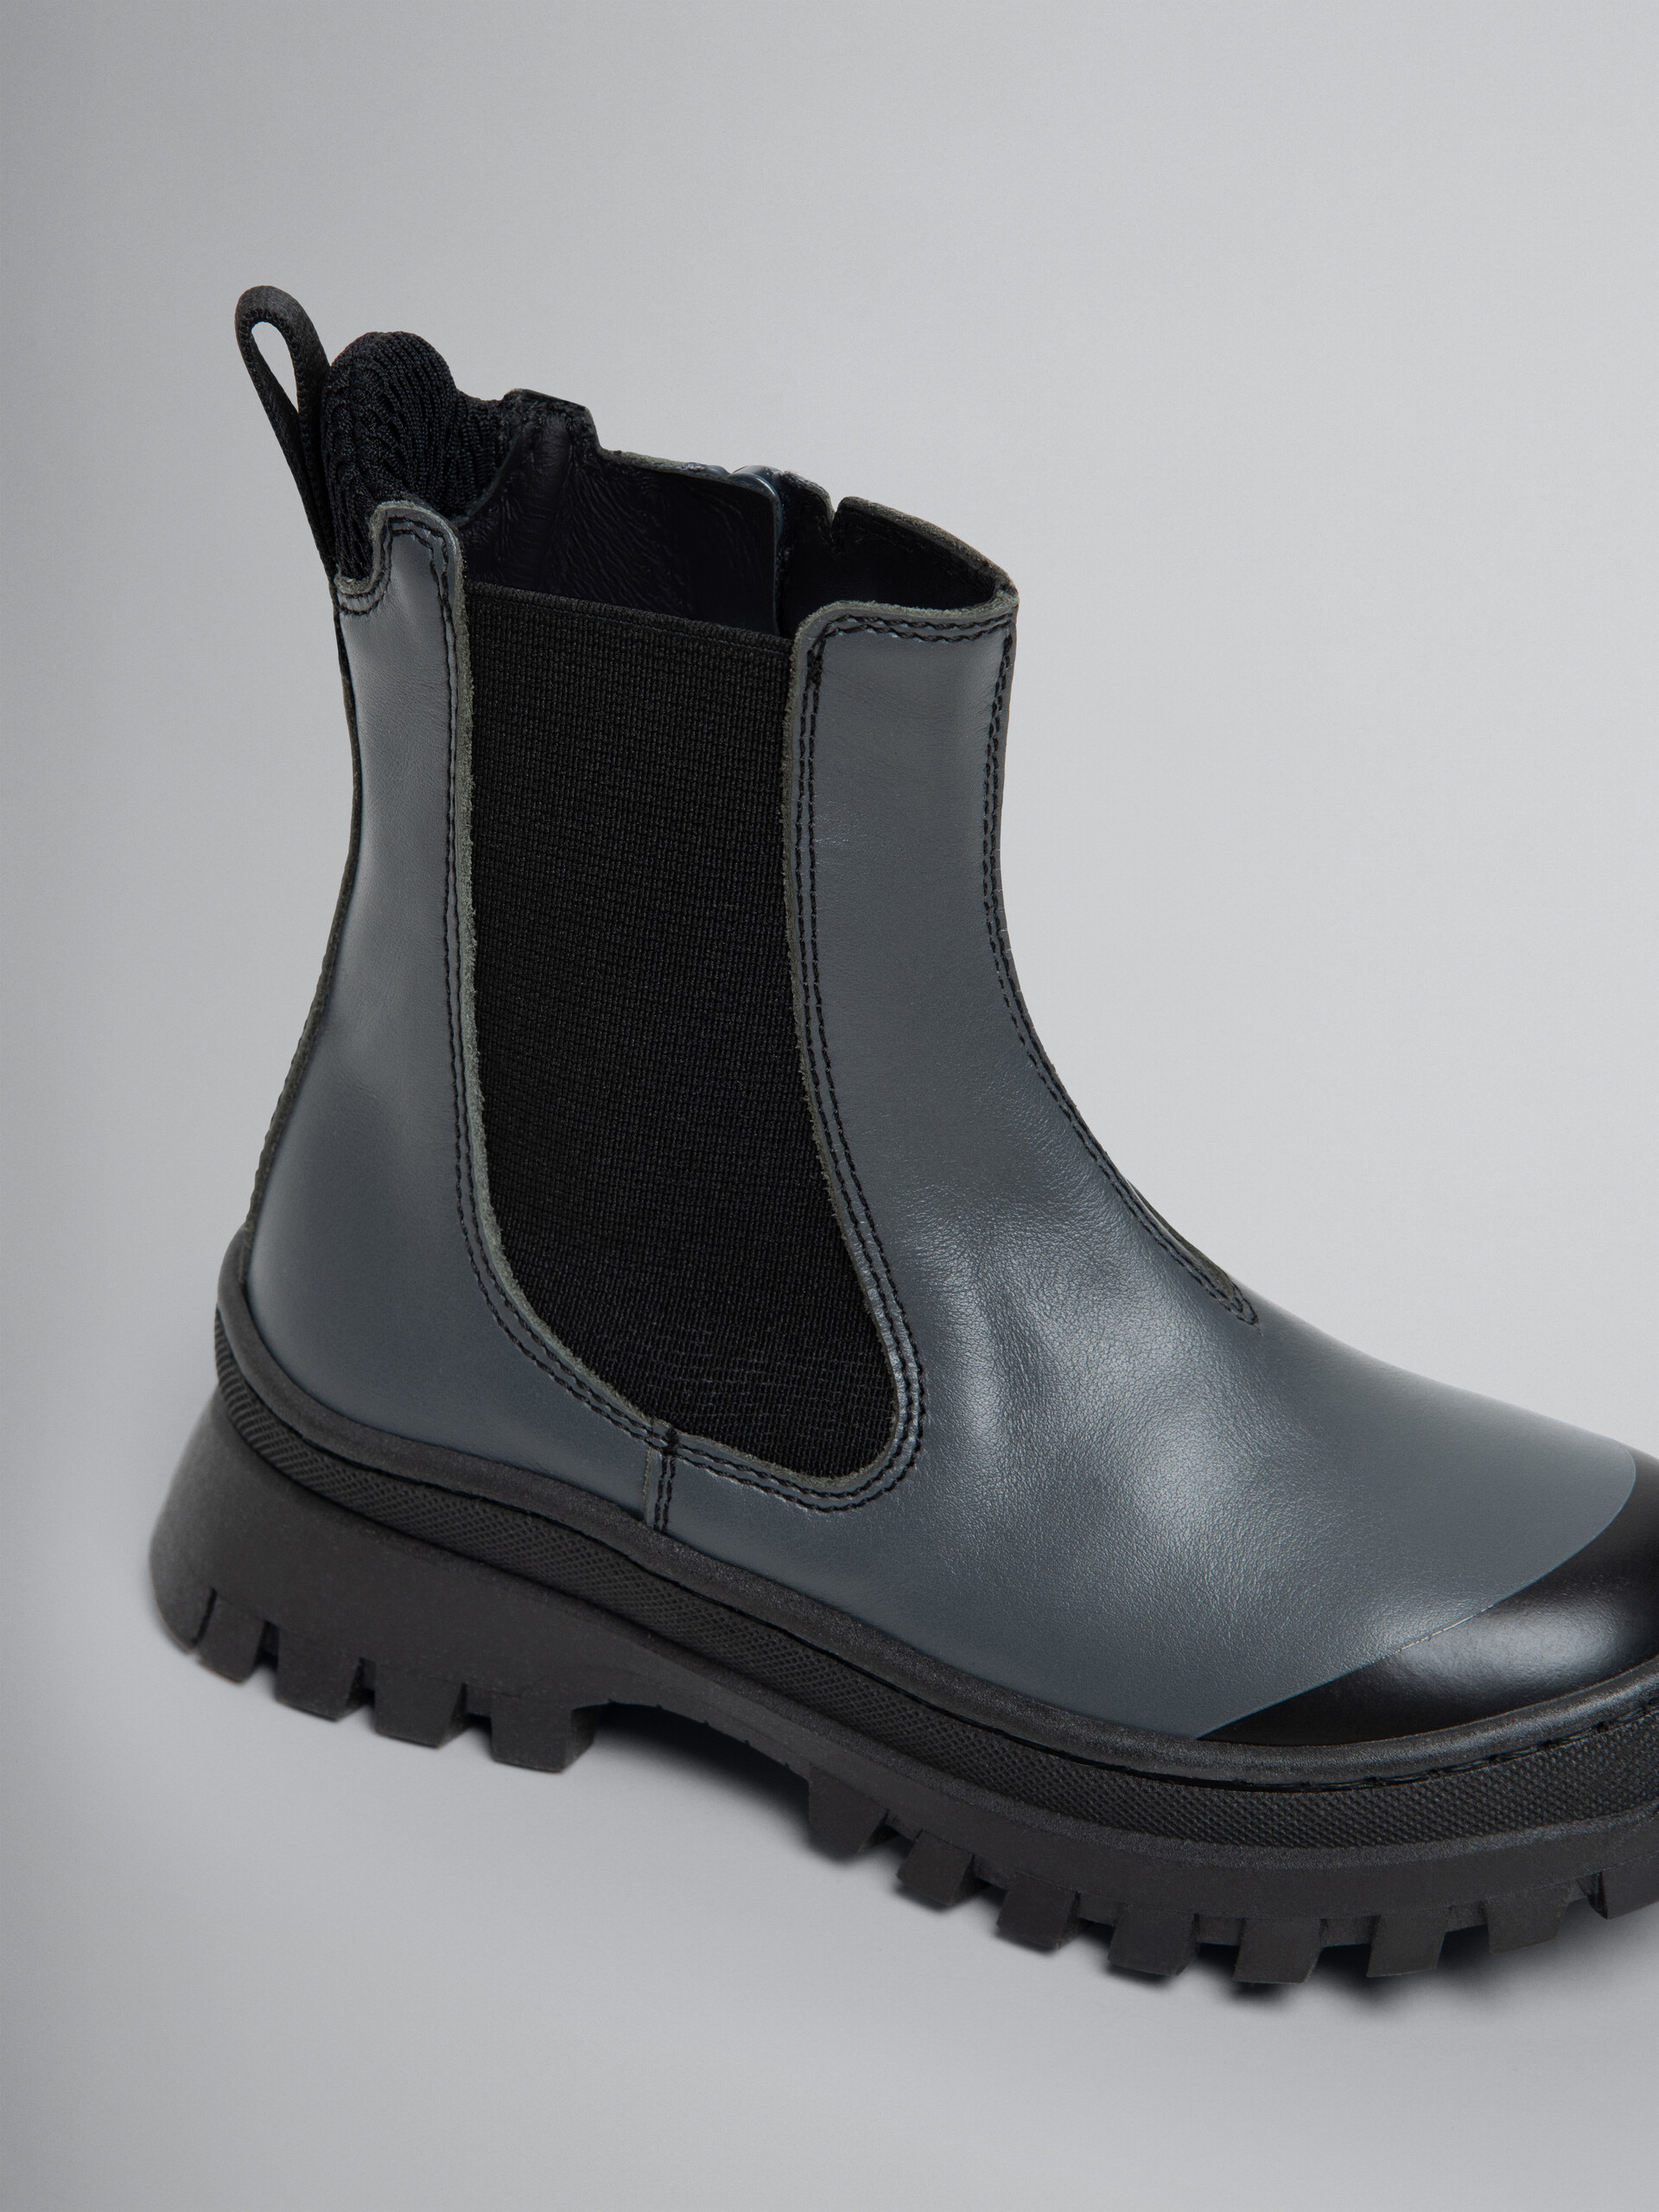 Grey leather Chelsea boot - Other accessories - Image 4